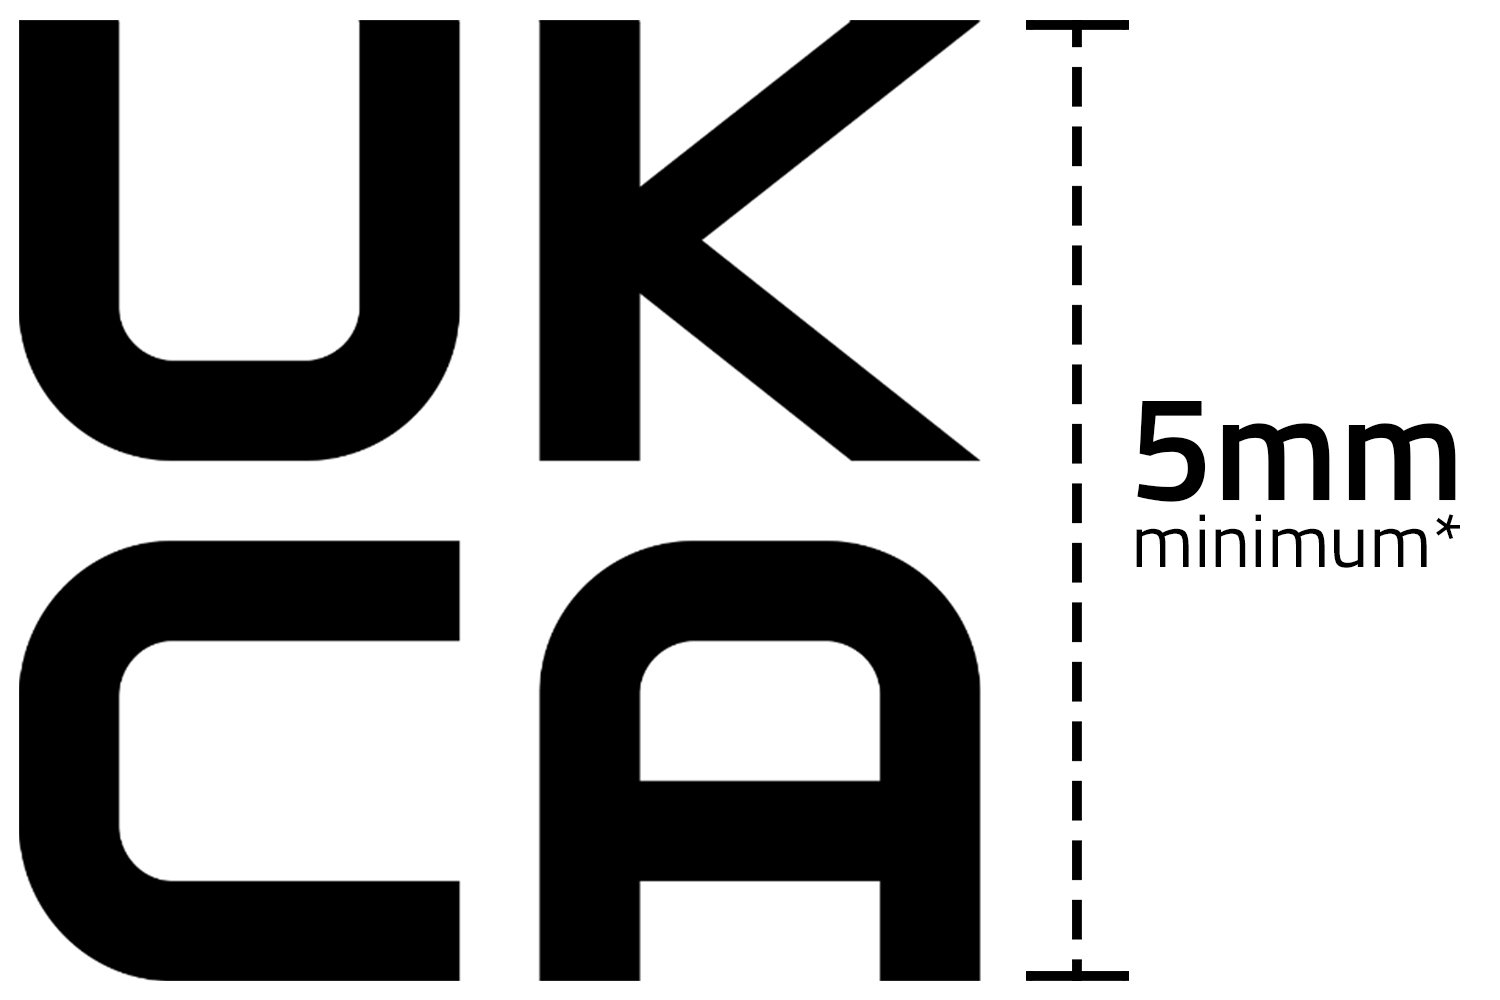 A black and white logo for uk ca with a 5mm minimum.